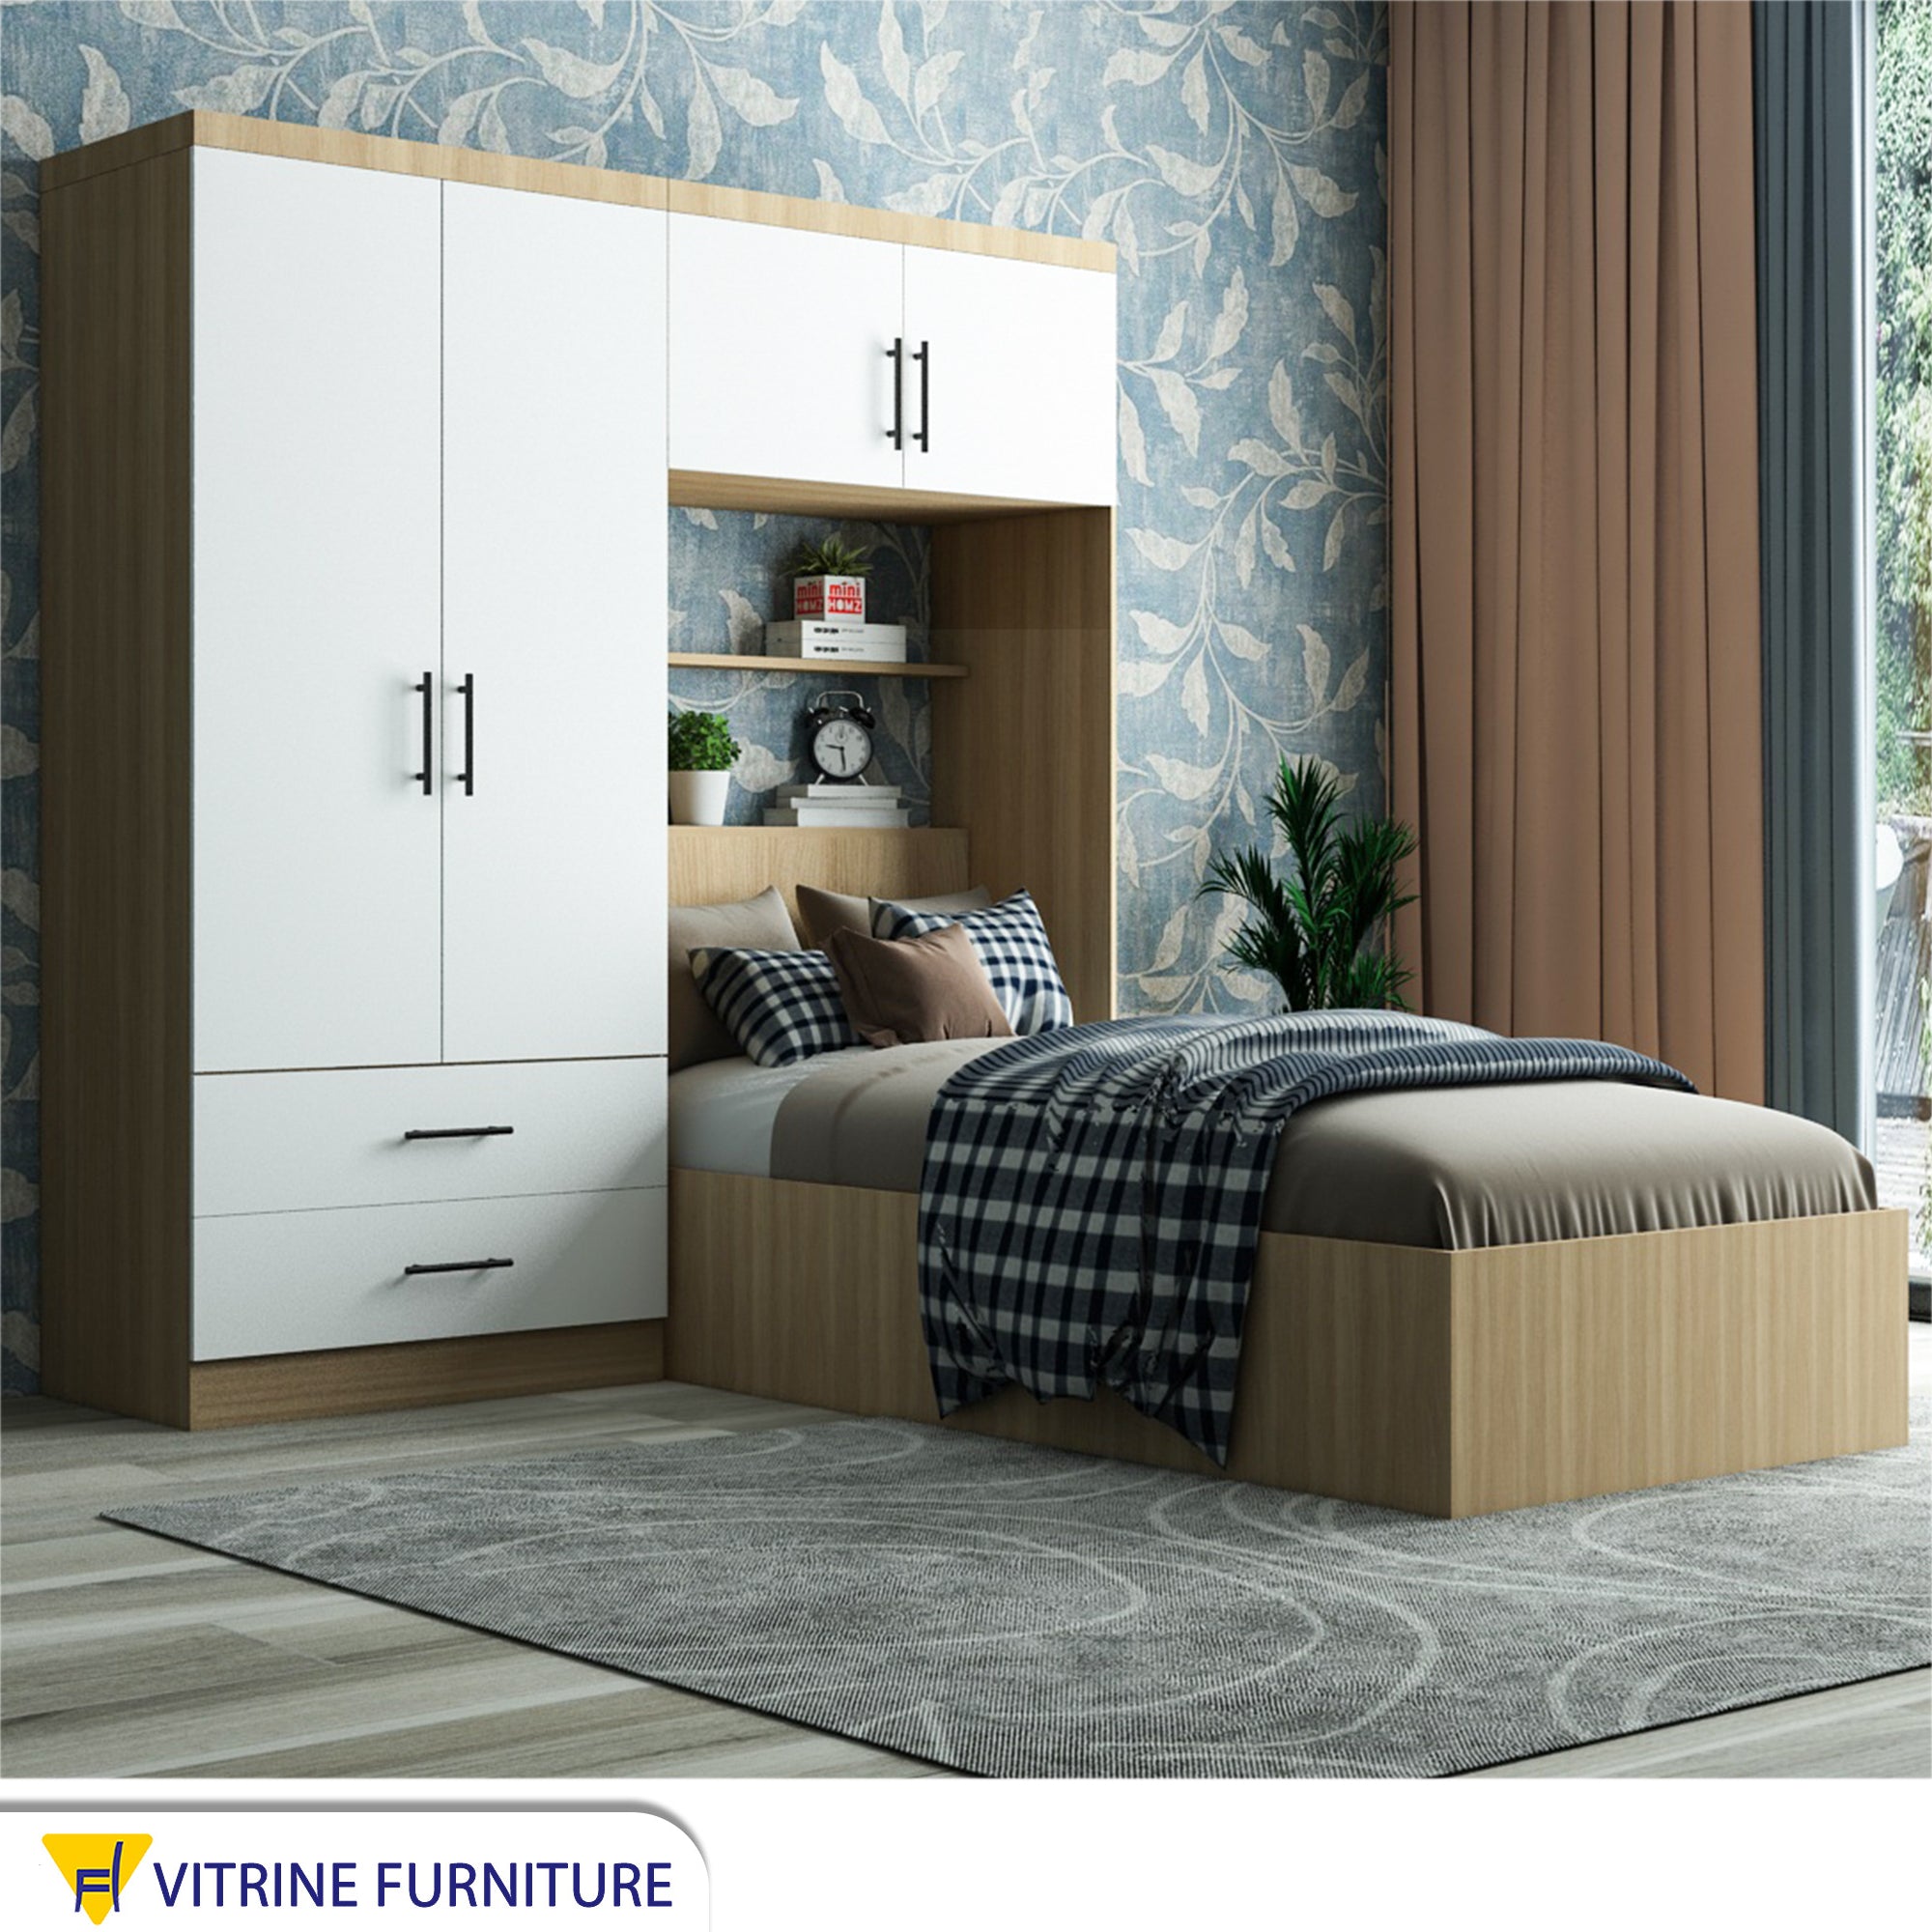 Single bedroom in wooden color with a large wardrobe